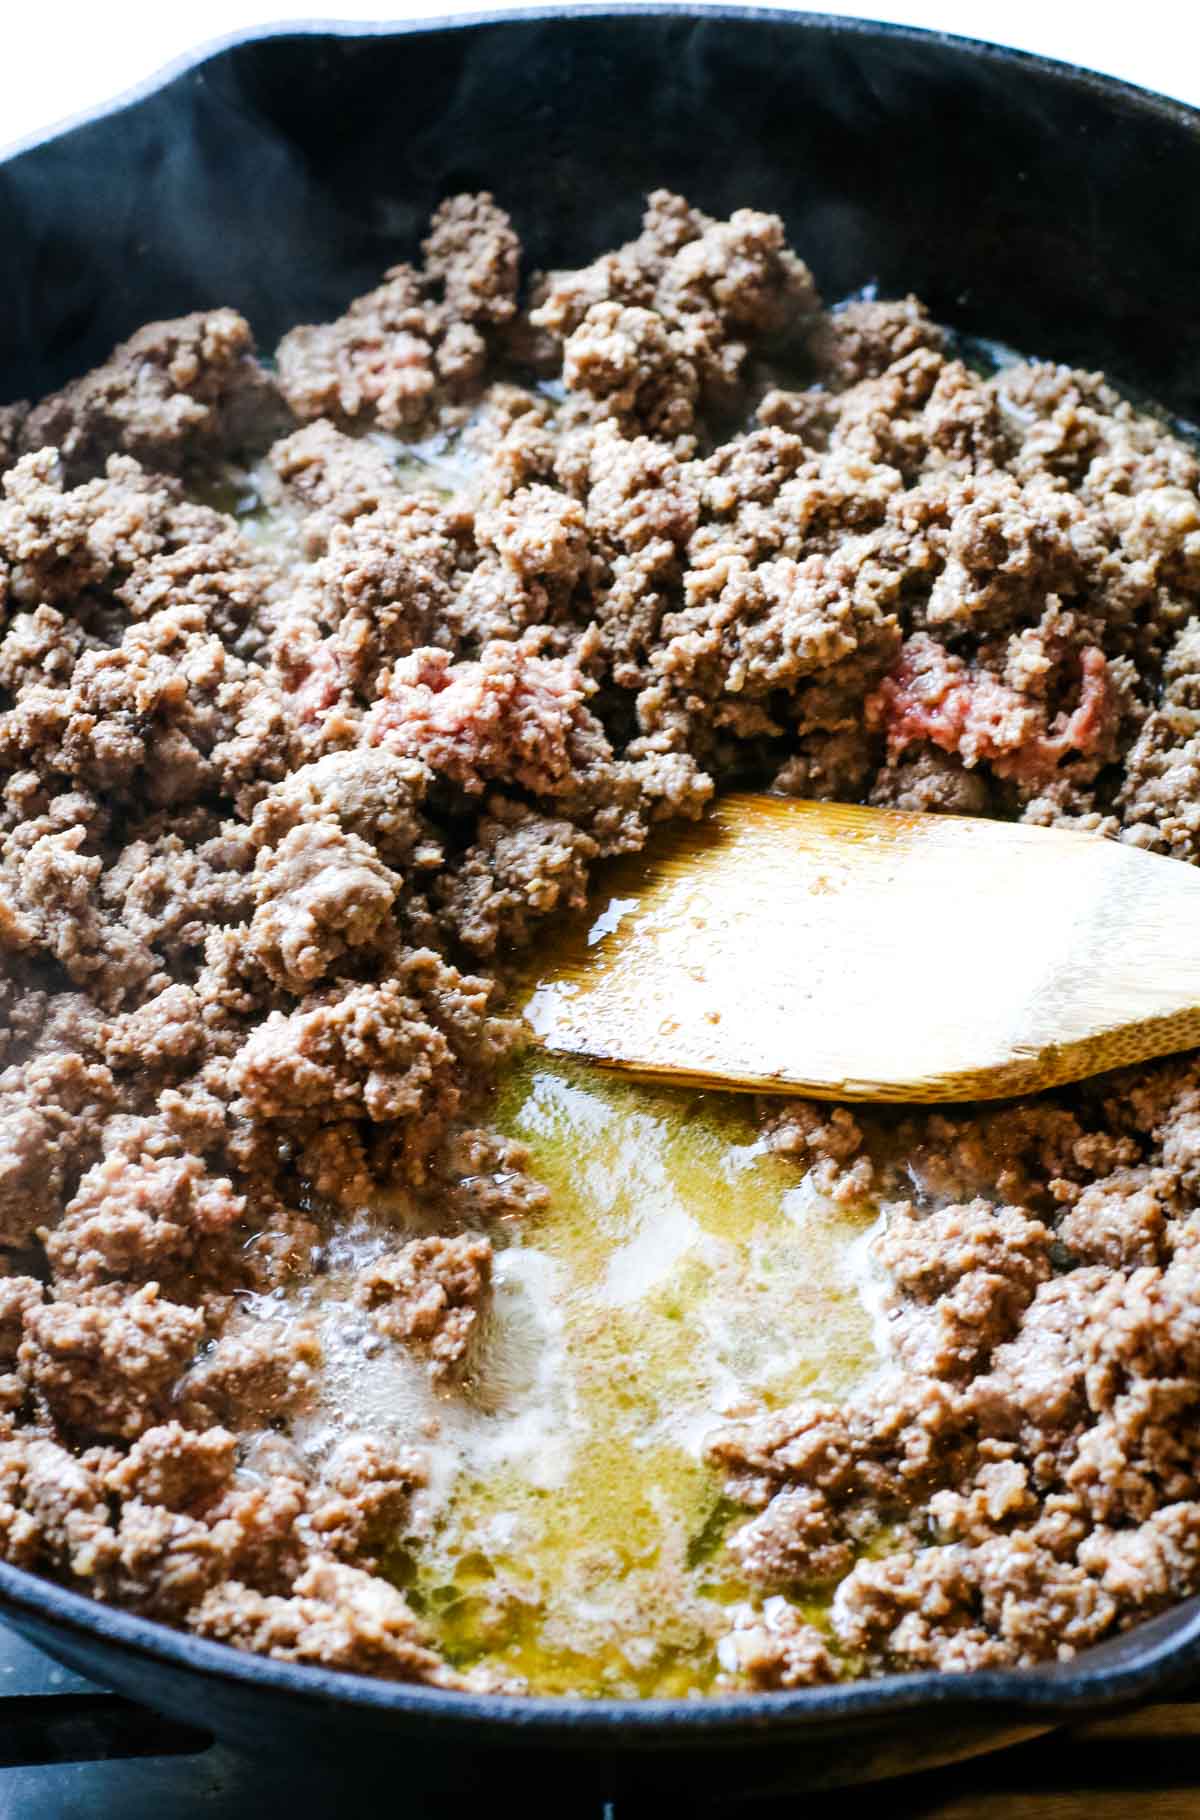 Browning ground beef and spoon exposing excess fat in meat